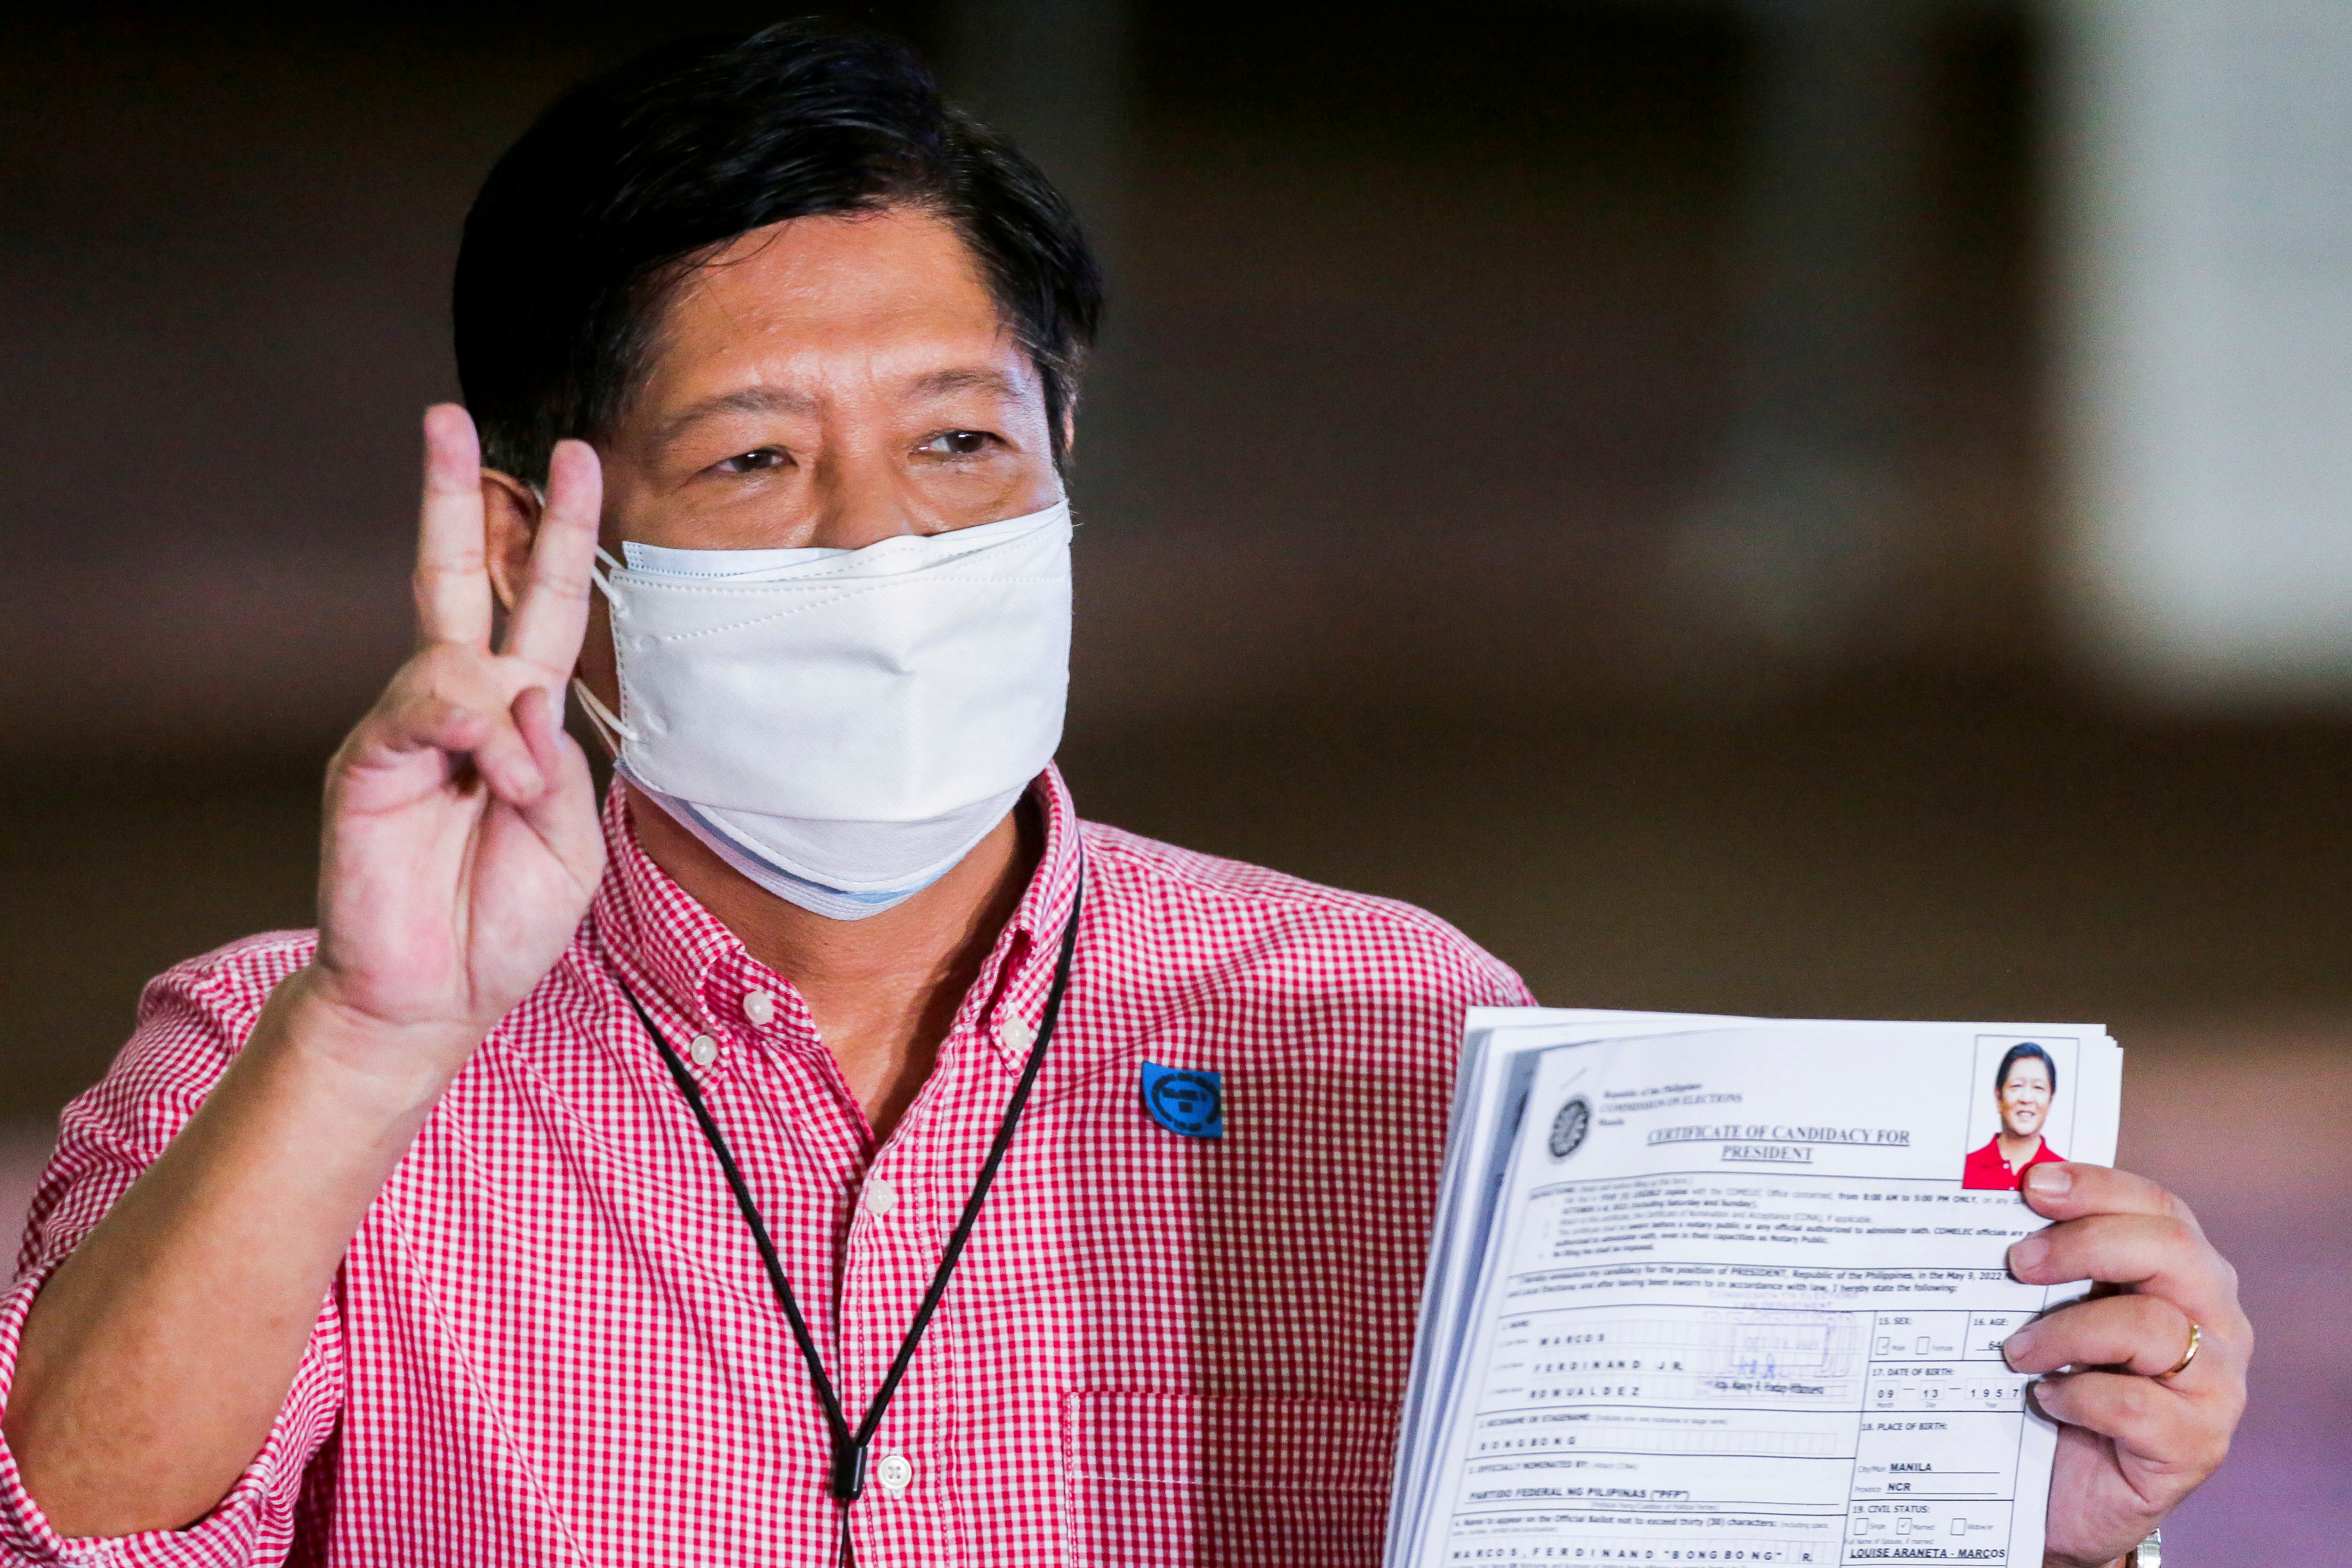 Ferdinand Marcos Jr, the son of late Philippines dictator Ferdinand Marcos, poses for pictures after filing his certificate of candidacy for president in the 2022 national election, in Pasay City, Metro Manila, Philippines, October 6, 2021. Rouelle Umali/Pool via Reuters/File Photo